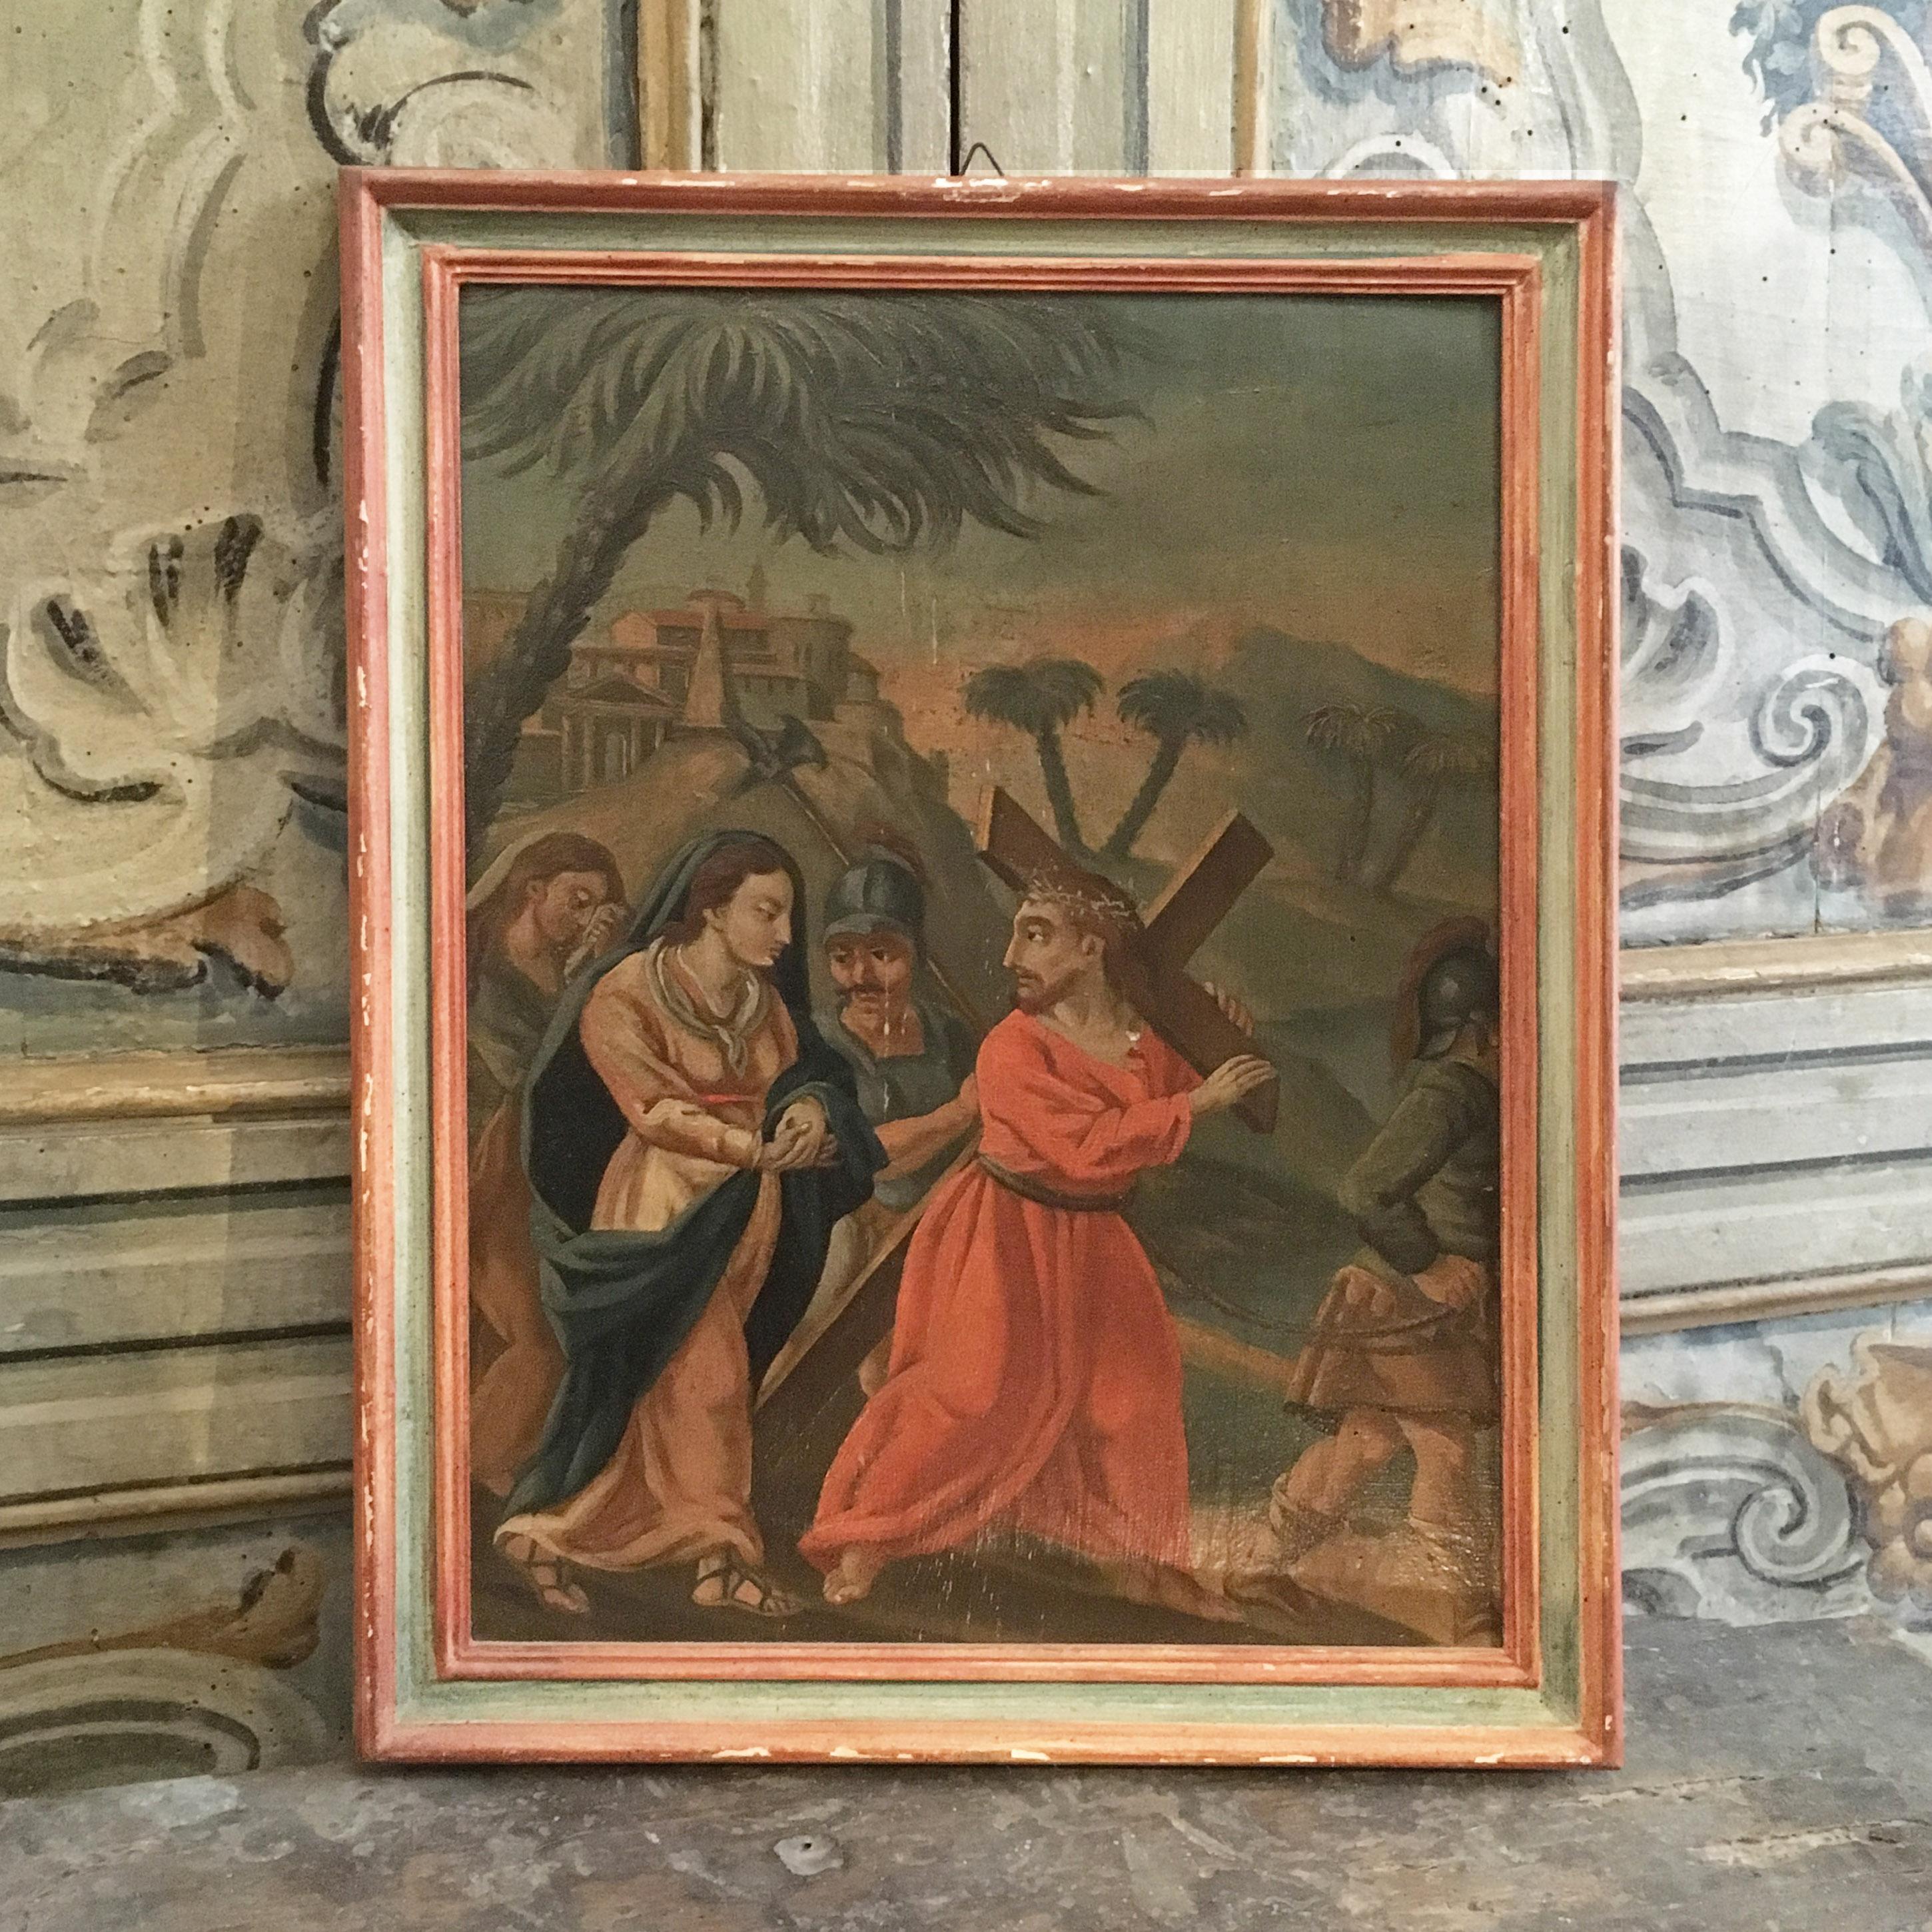 Wood Mid-18th Century Italian Set of 14 Paintings with Scenes from the 